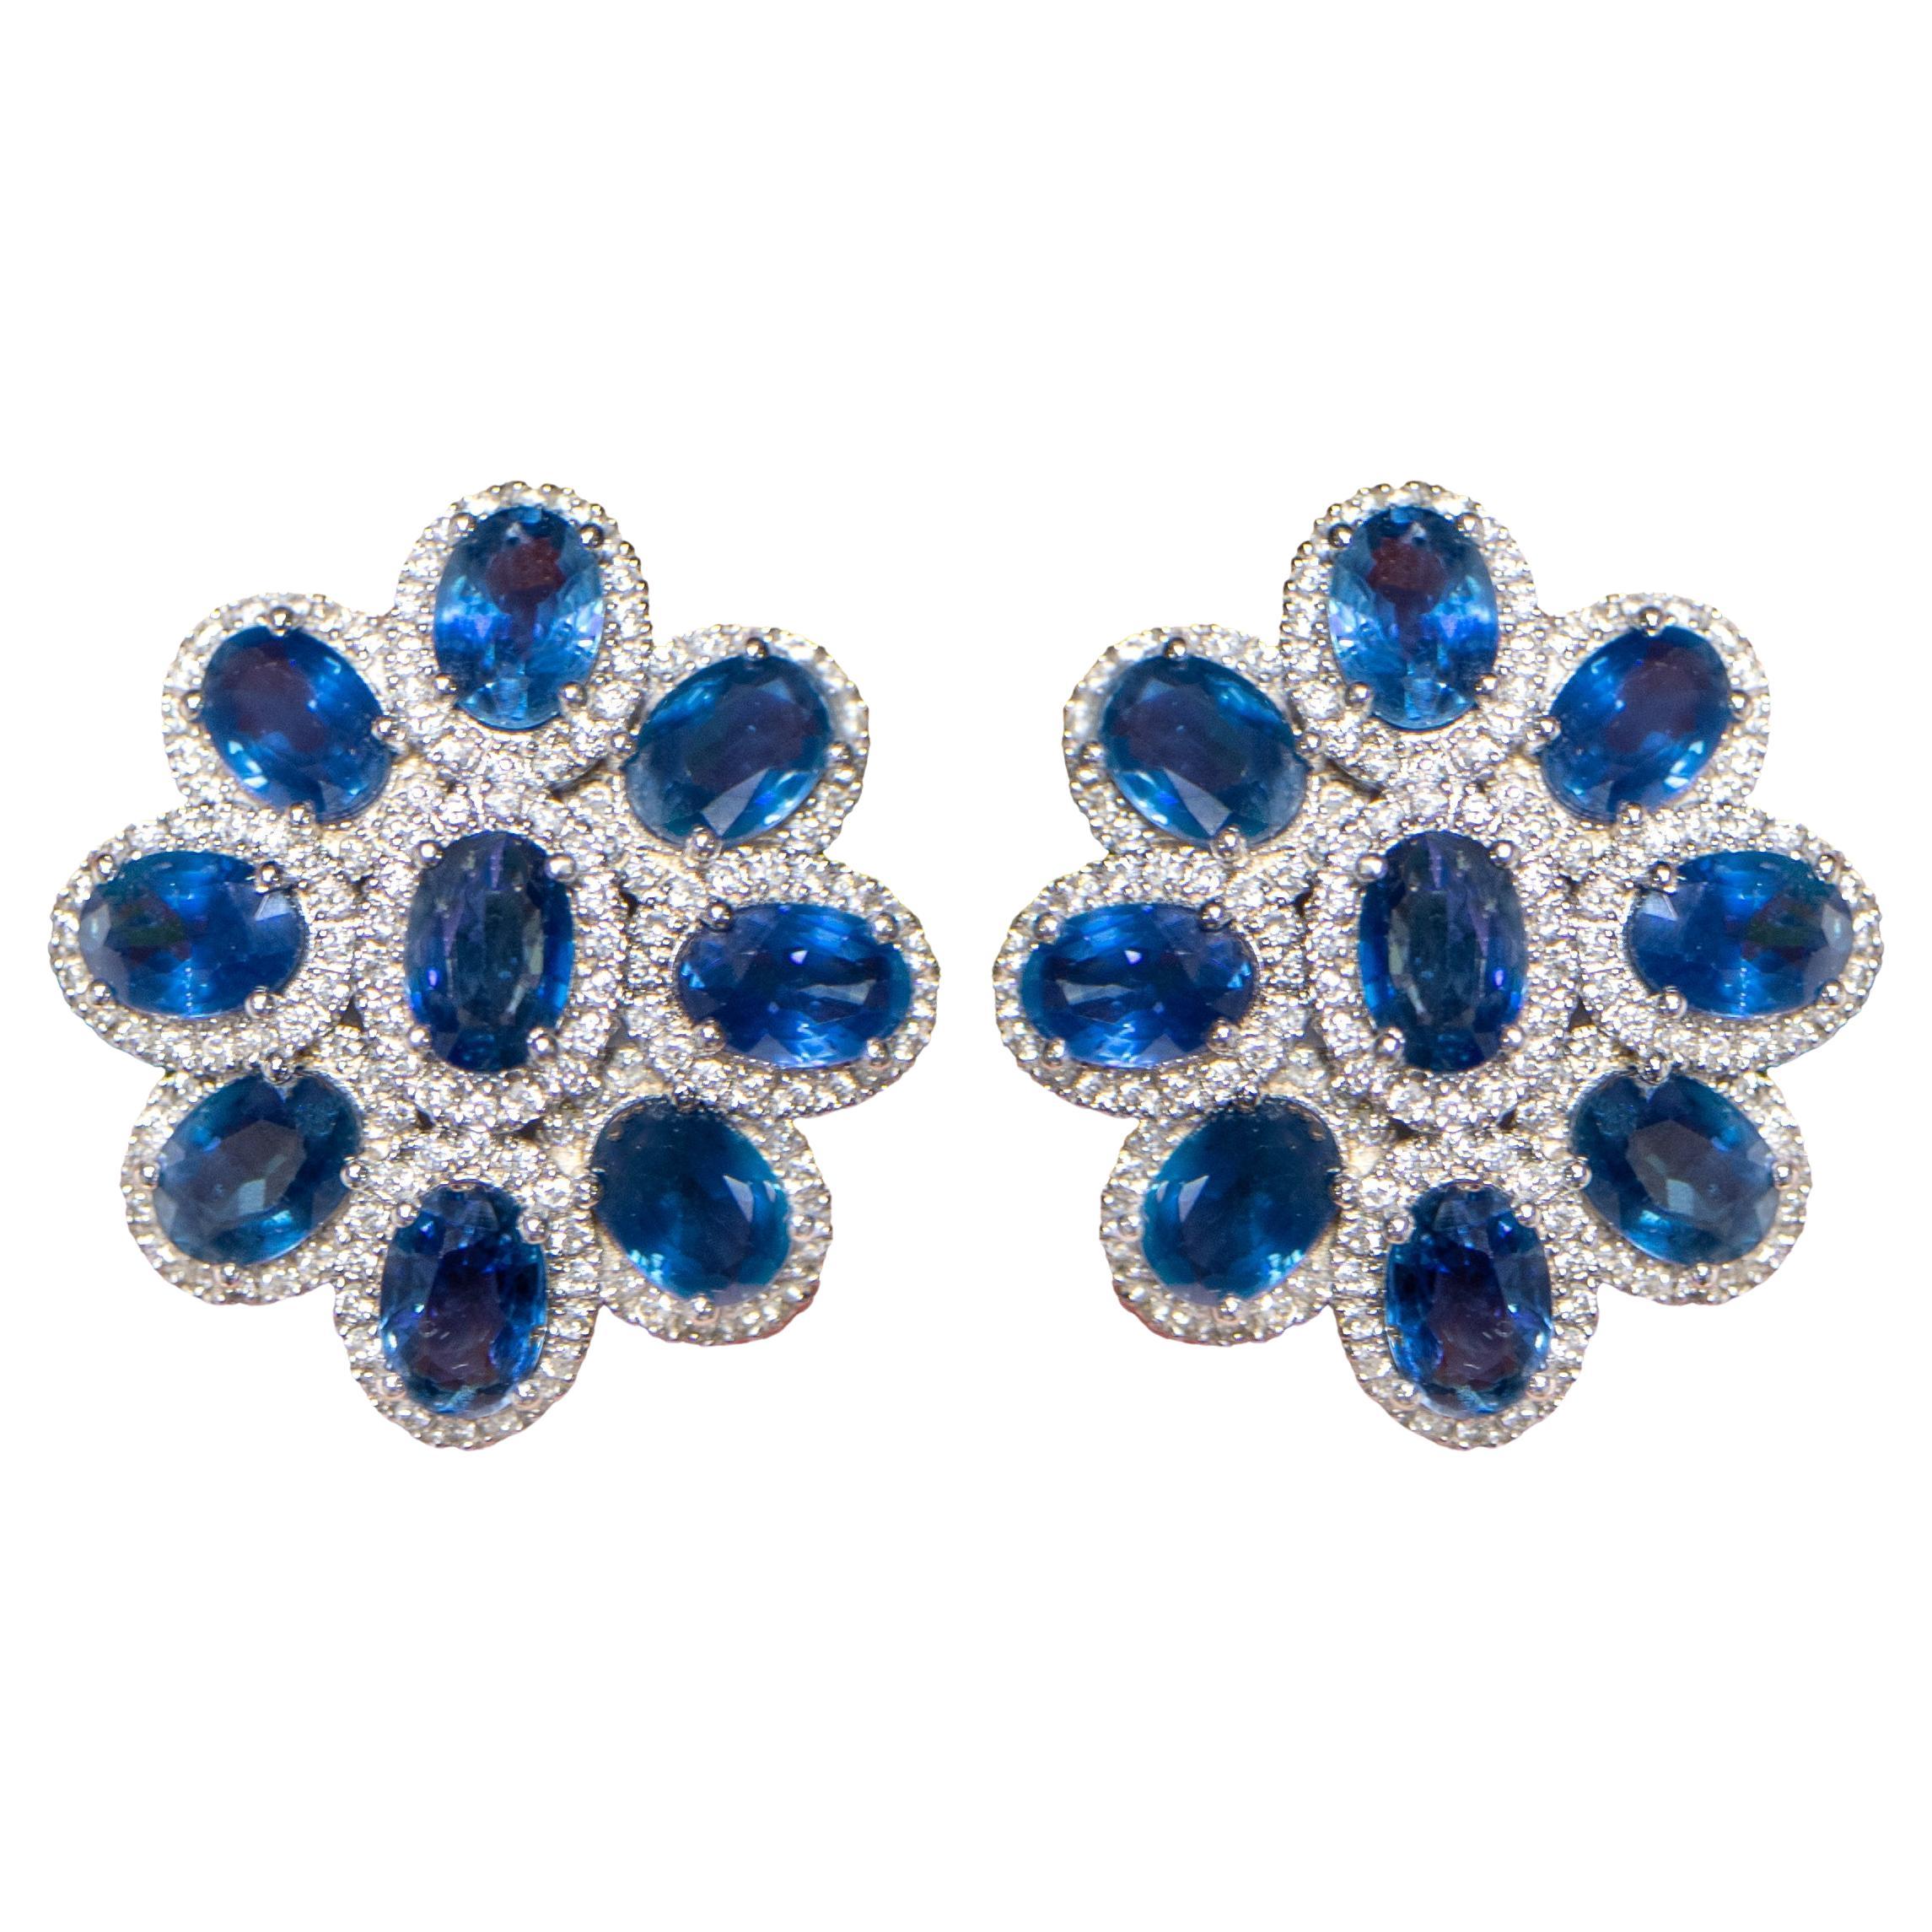 Blue Sapphire Flower Earrings With Diamonds 11 Carats 18K Gold For Sale